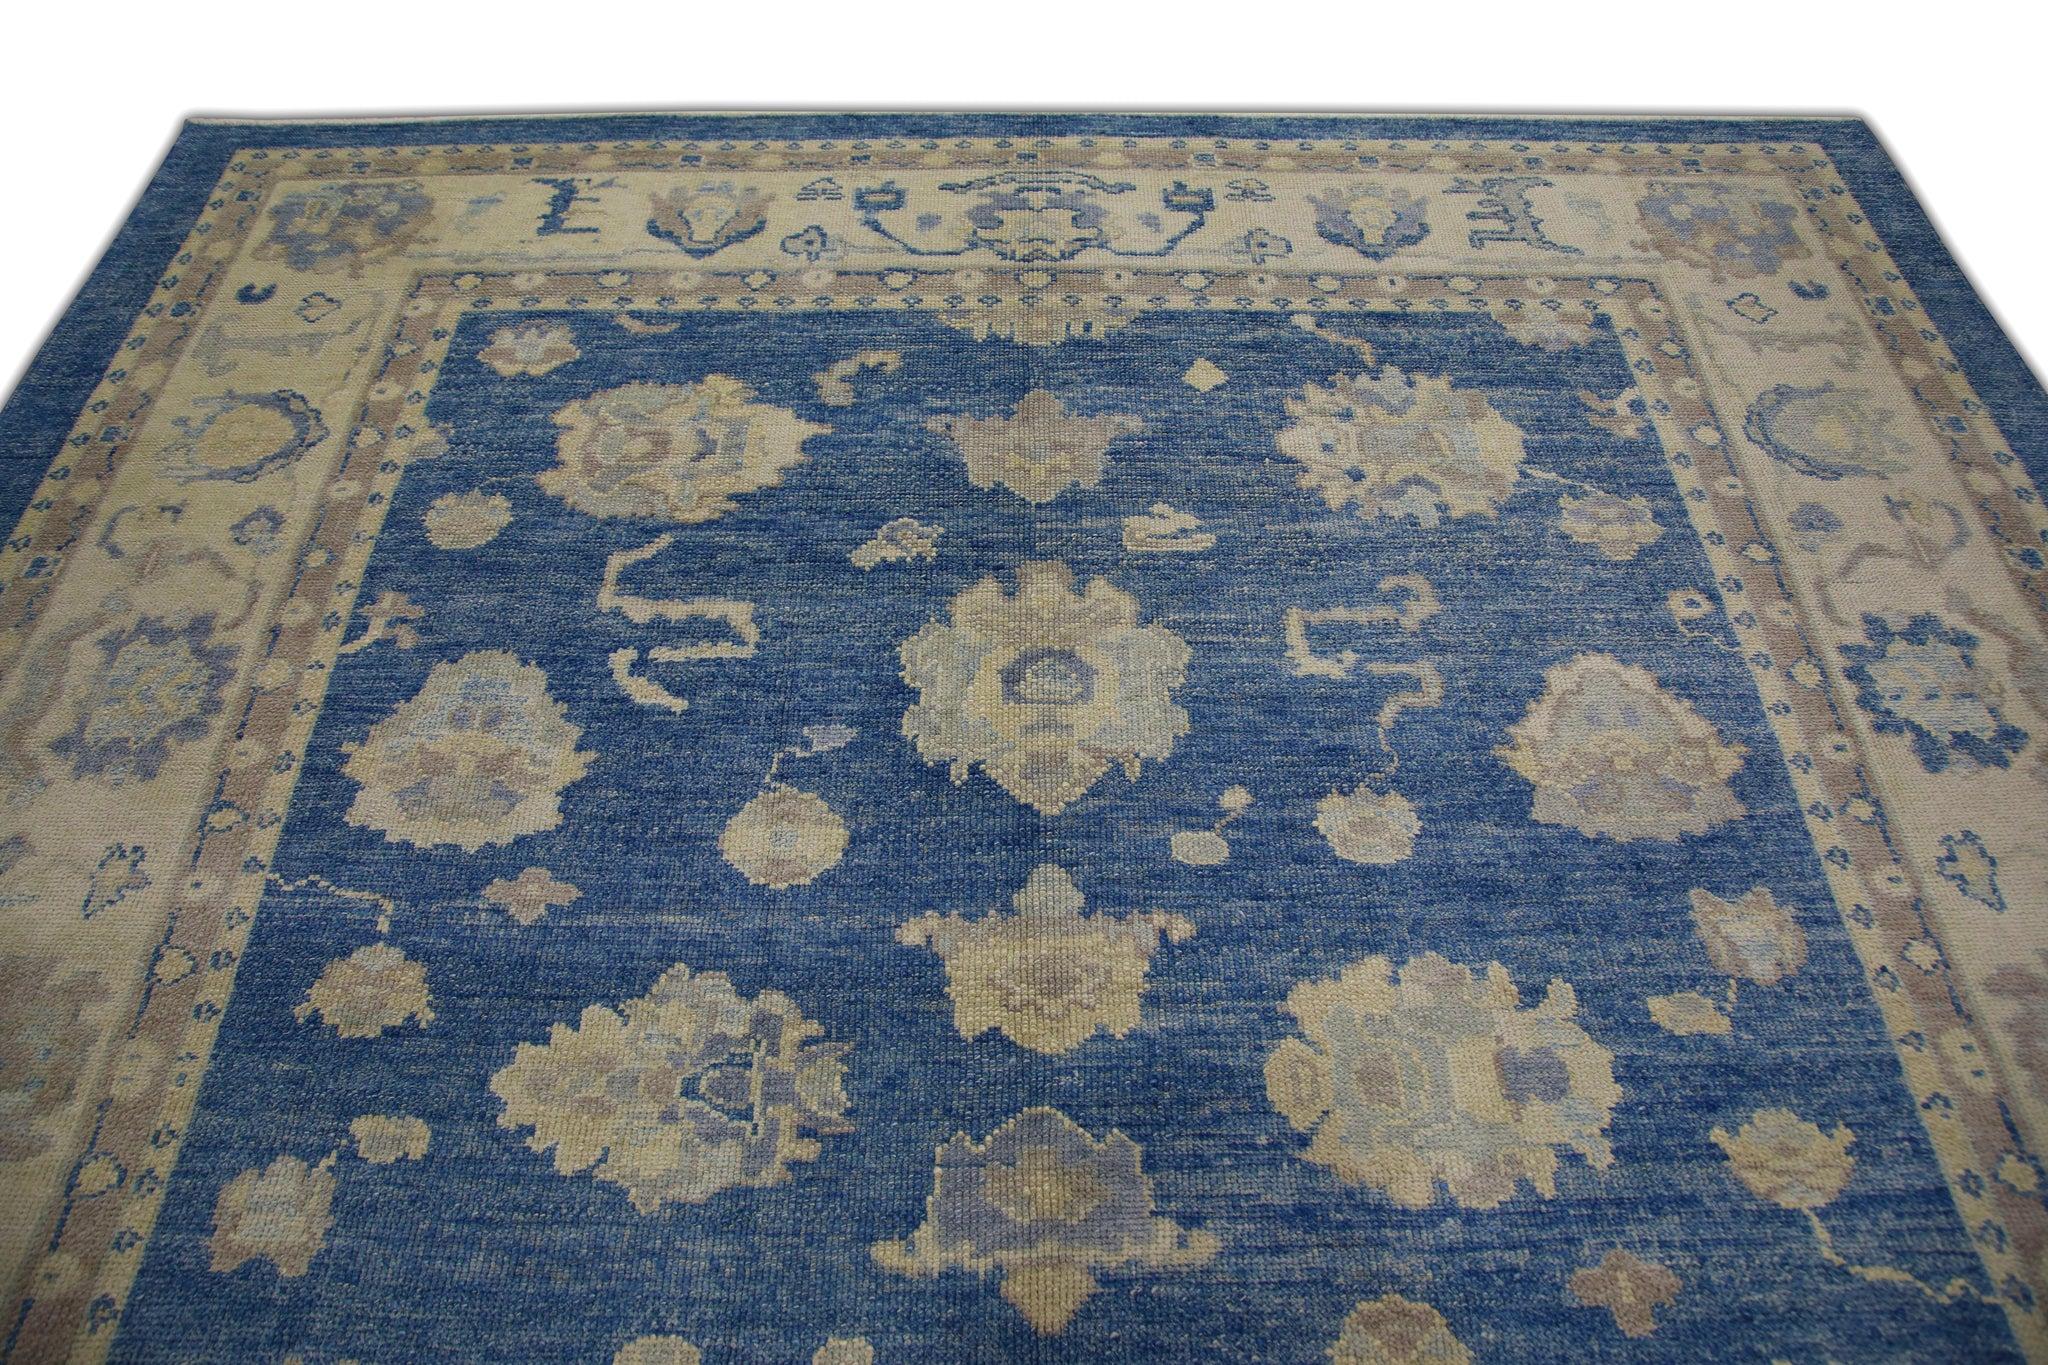 Vegetable Dyed Floral Handwoven Wool Turkish Oushak Rug in Blue and Cream 8'9